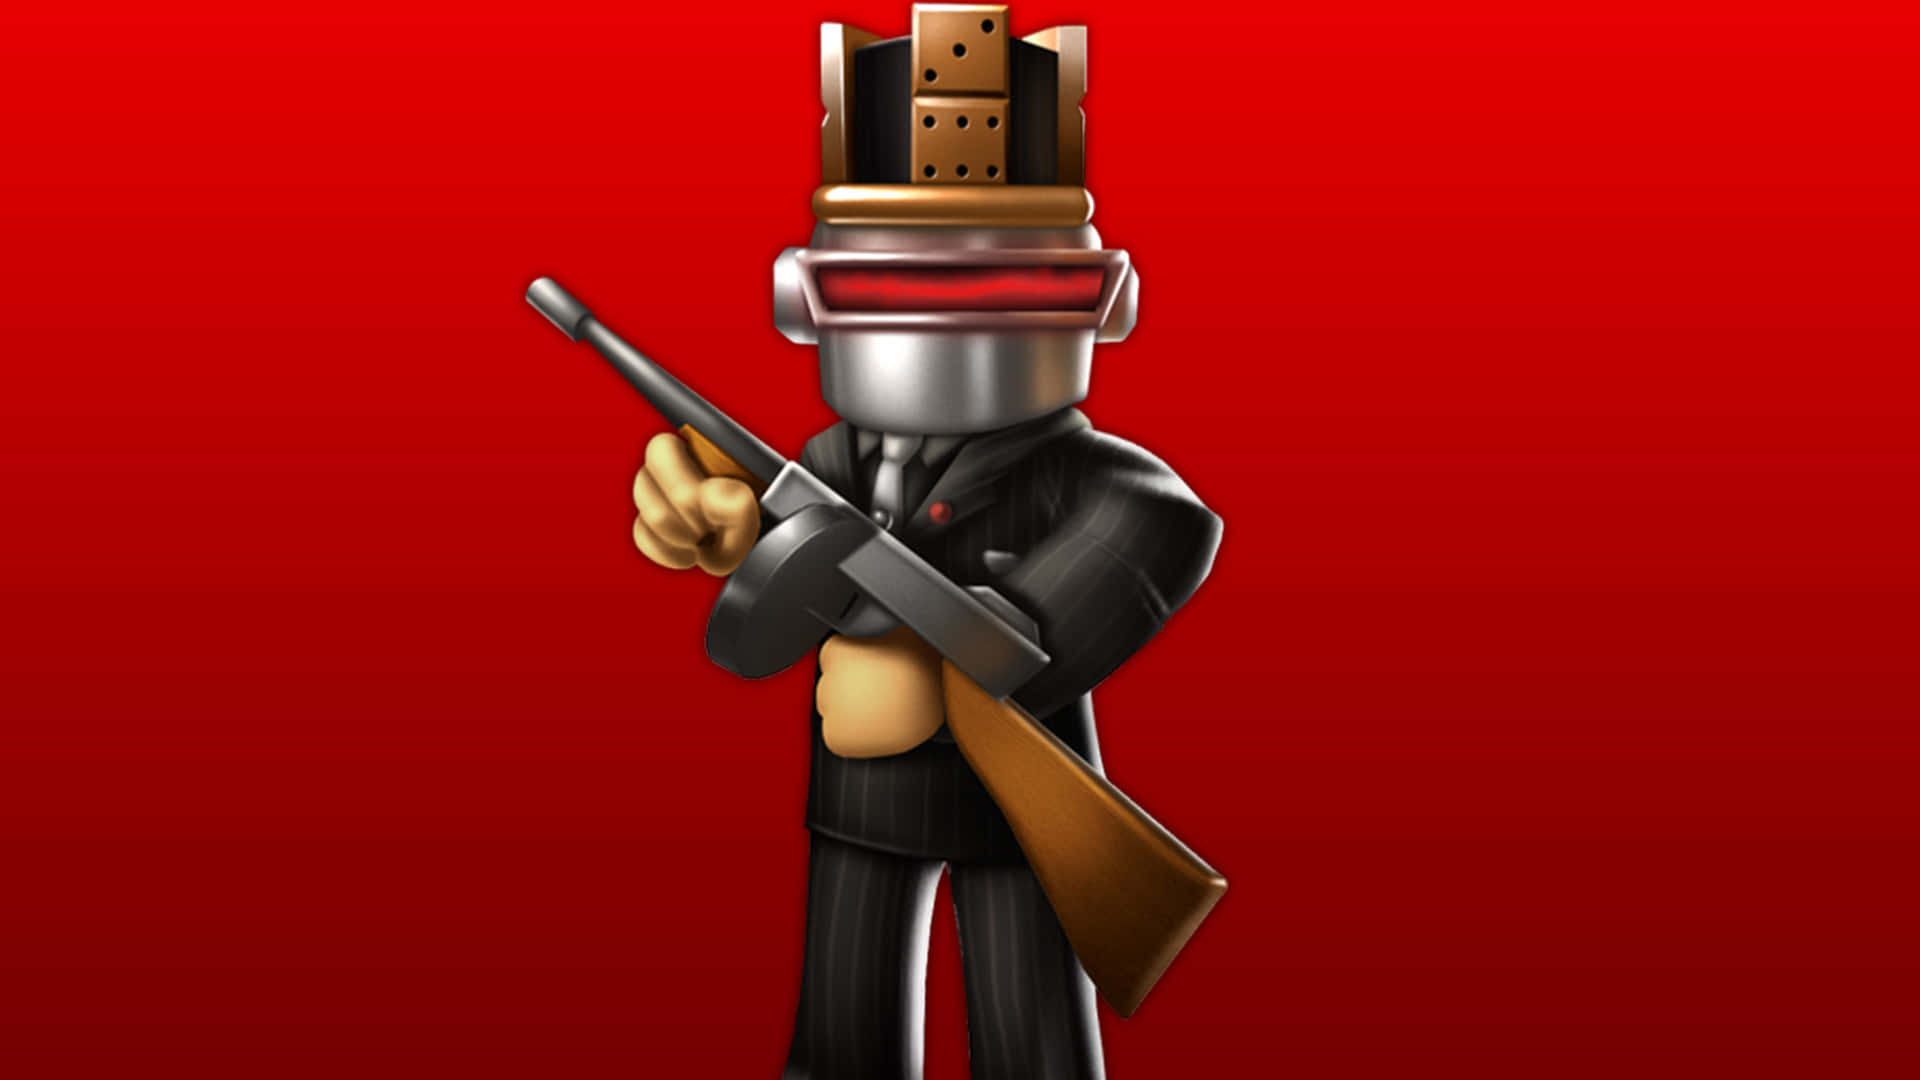 Download Explore the Virtual World with Roblox Boy Wallpaper